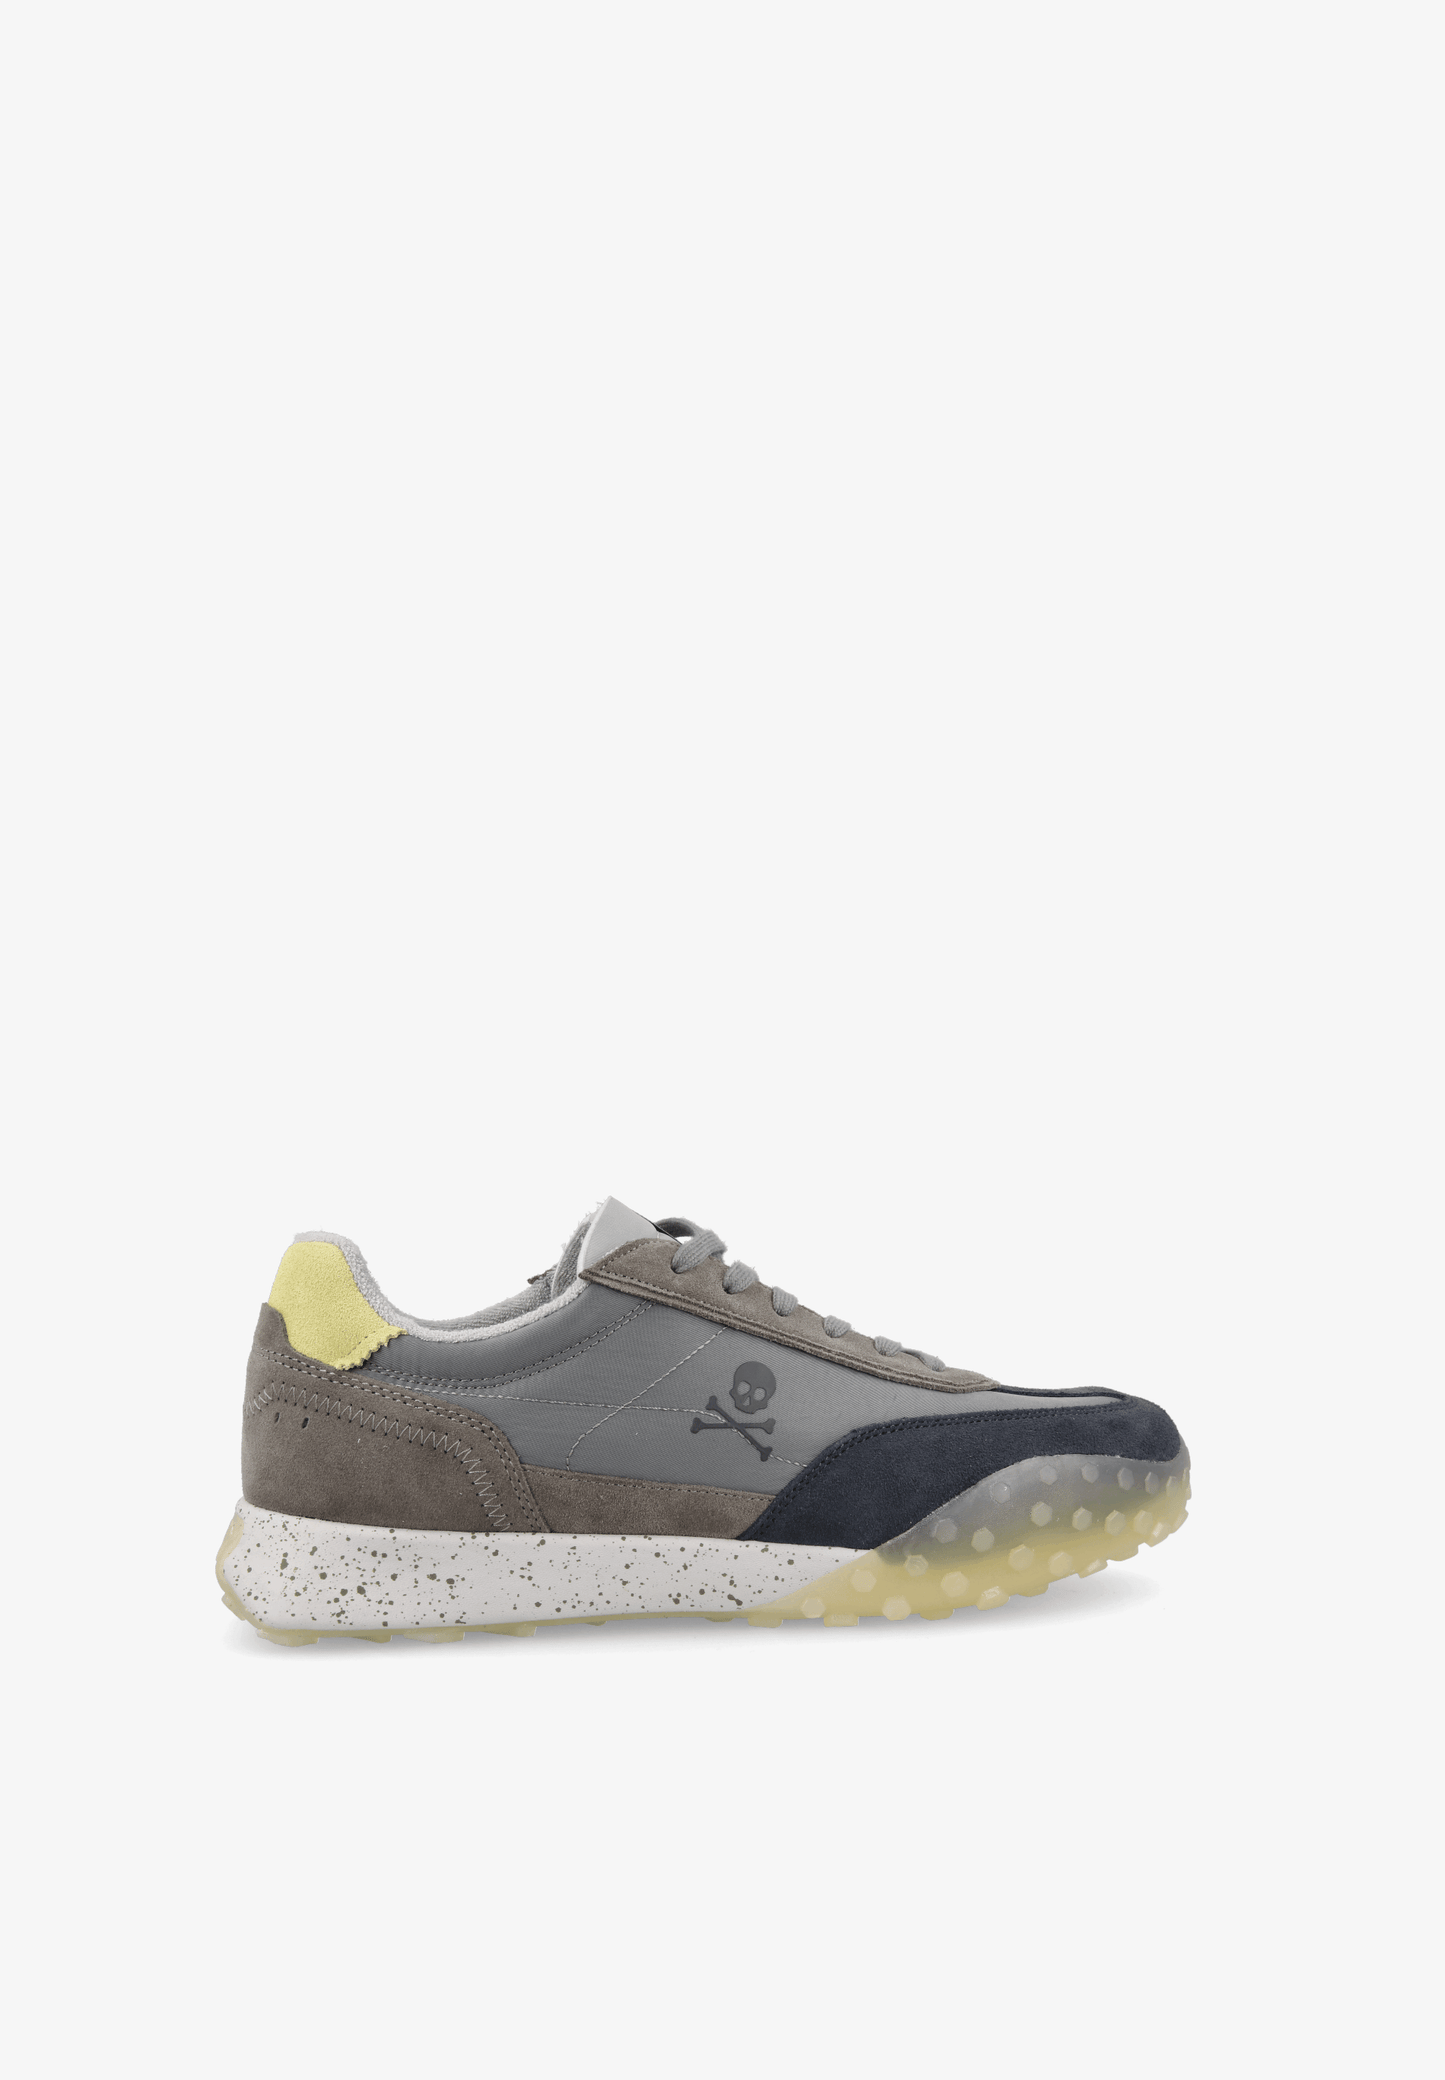 SUEDE SNEAKERS WITH SPECKLED SOLE